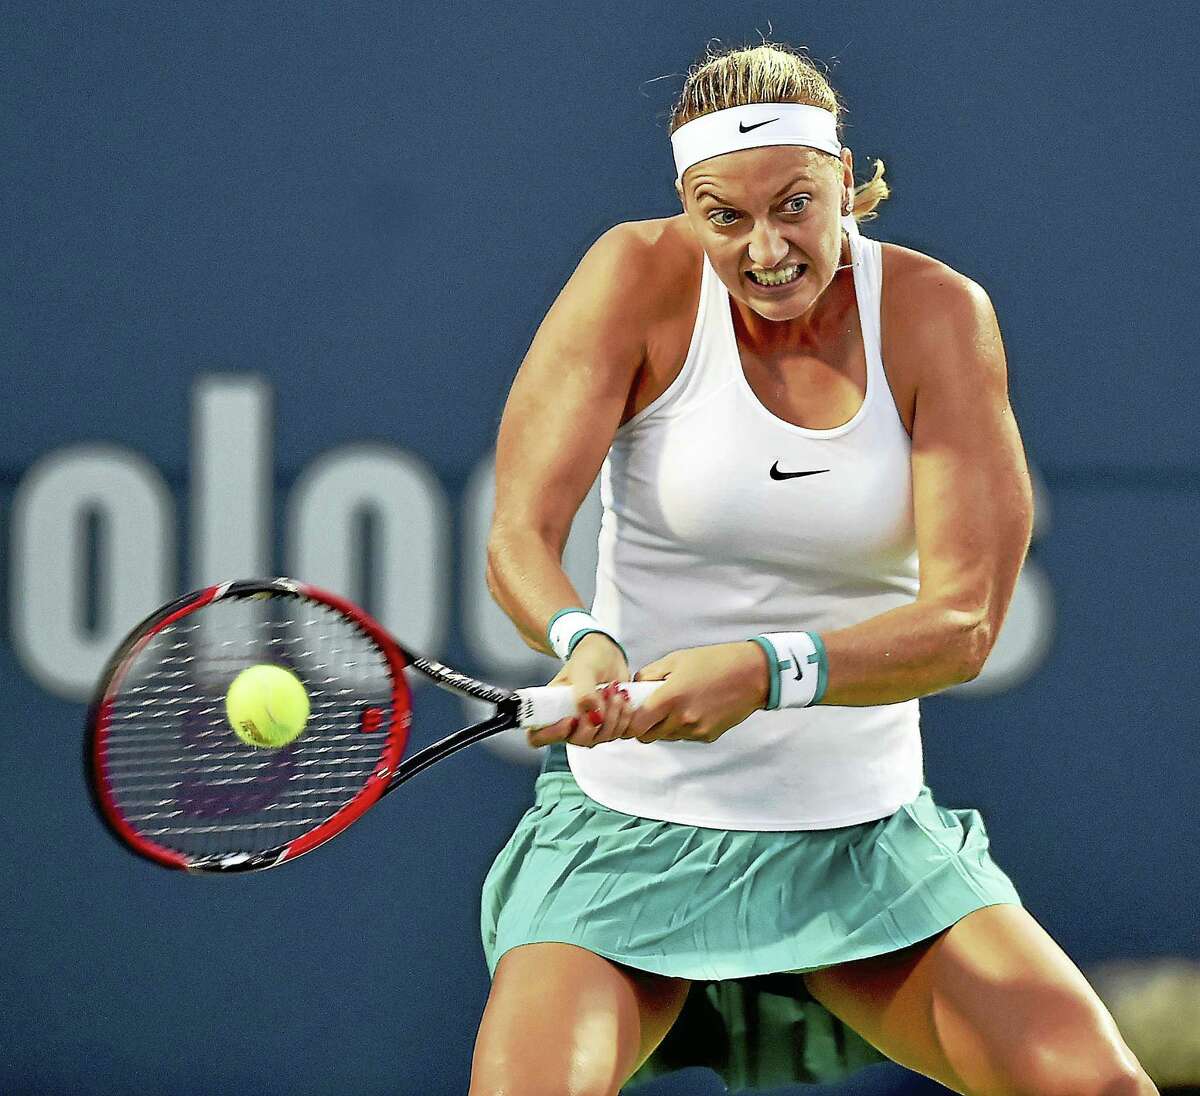 Czech Petra Kvitova hits a forehand return to Canadian Eugenie Bouchard in a 6-3, 6-2 win Wednesday evening in the second round of the Connecticut Open in New Haven.